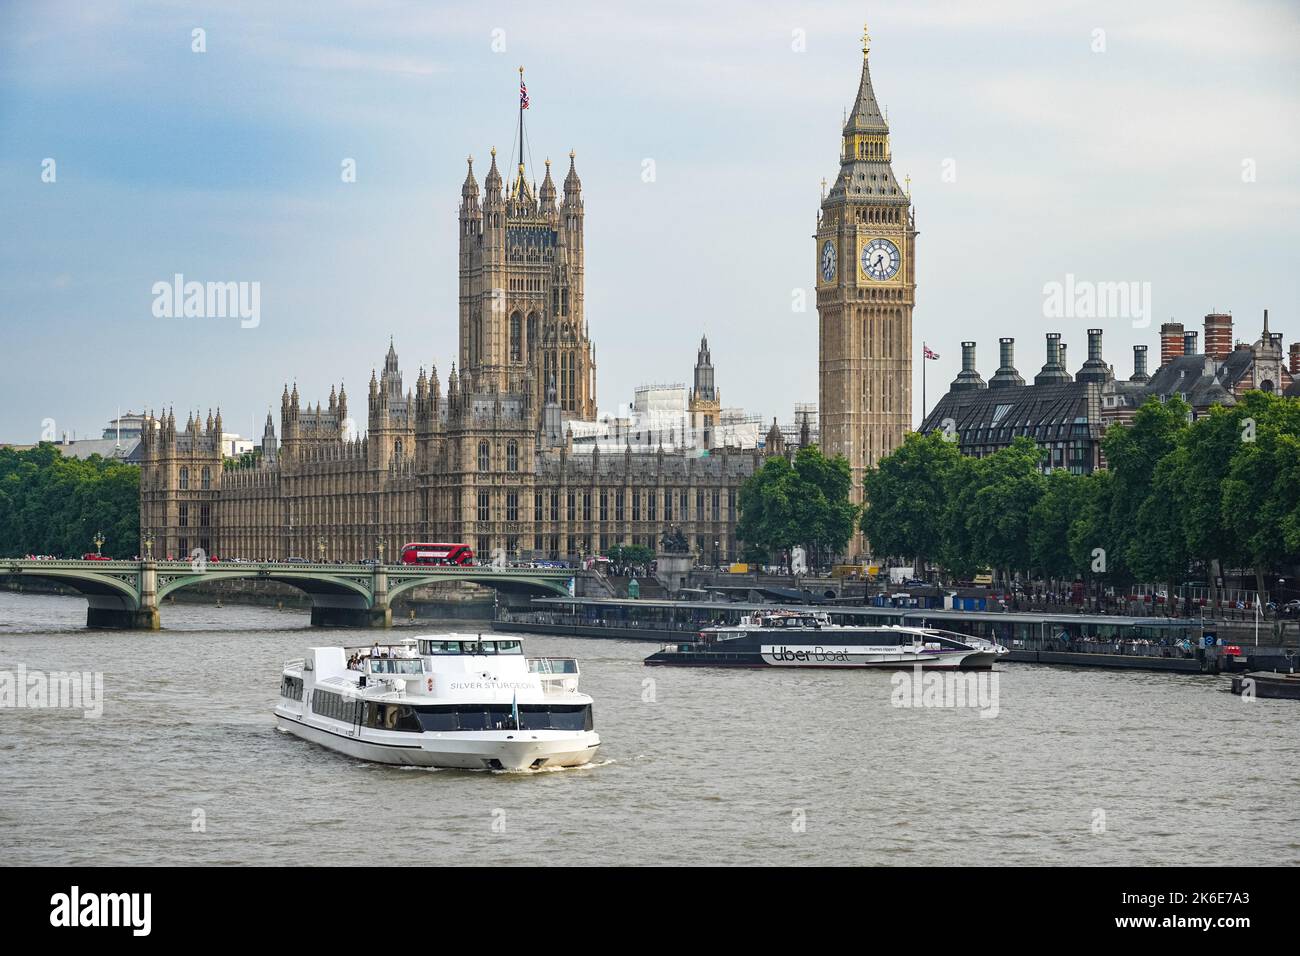 Cruise boats on the River Thames with Westminster Bridge, the Big Ben clock tower and the Palace of Westminster, London England United Kingdom UK Stock Photo